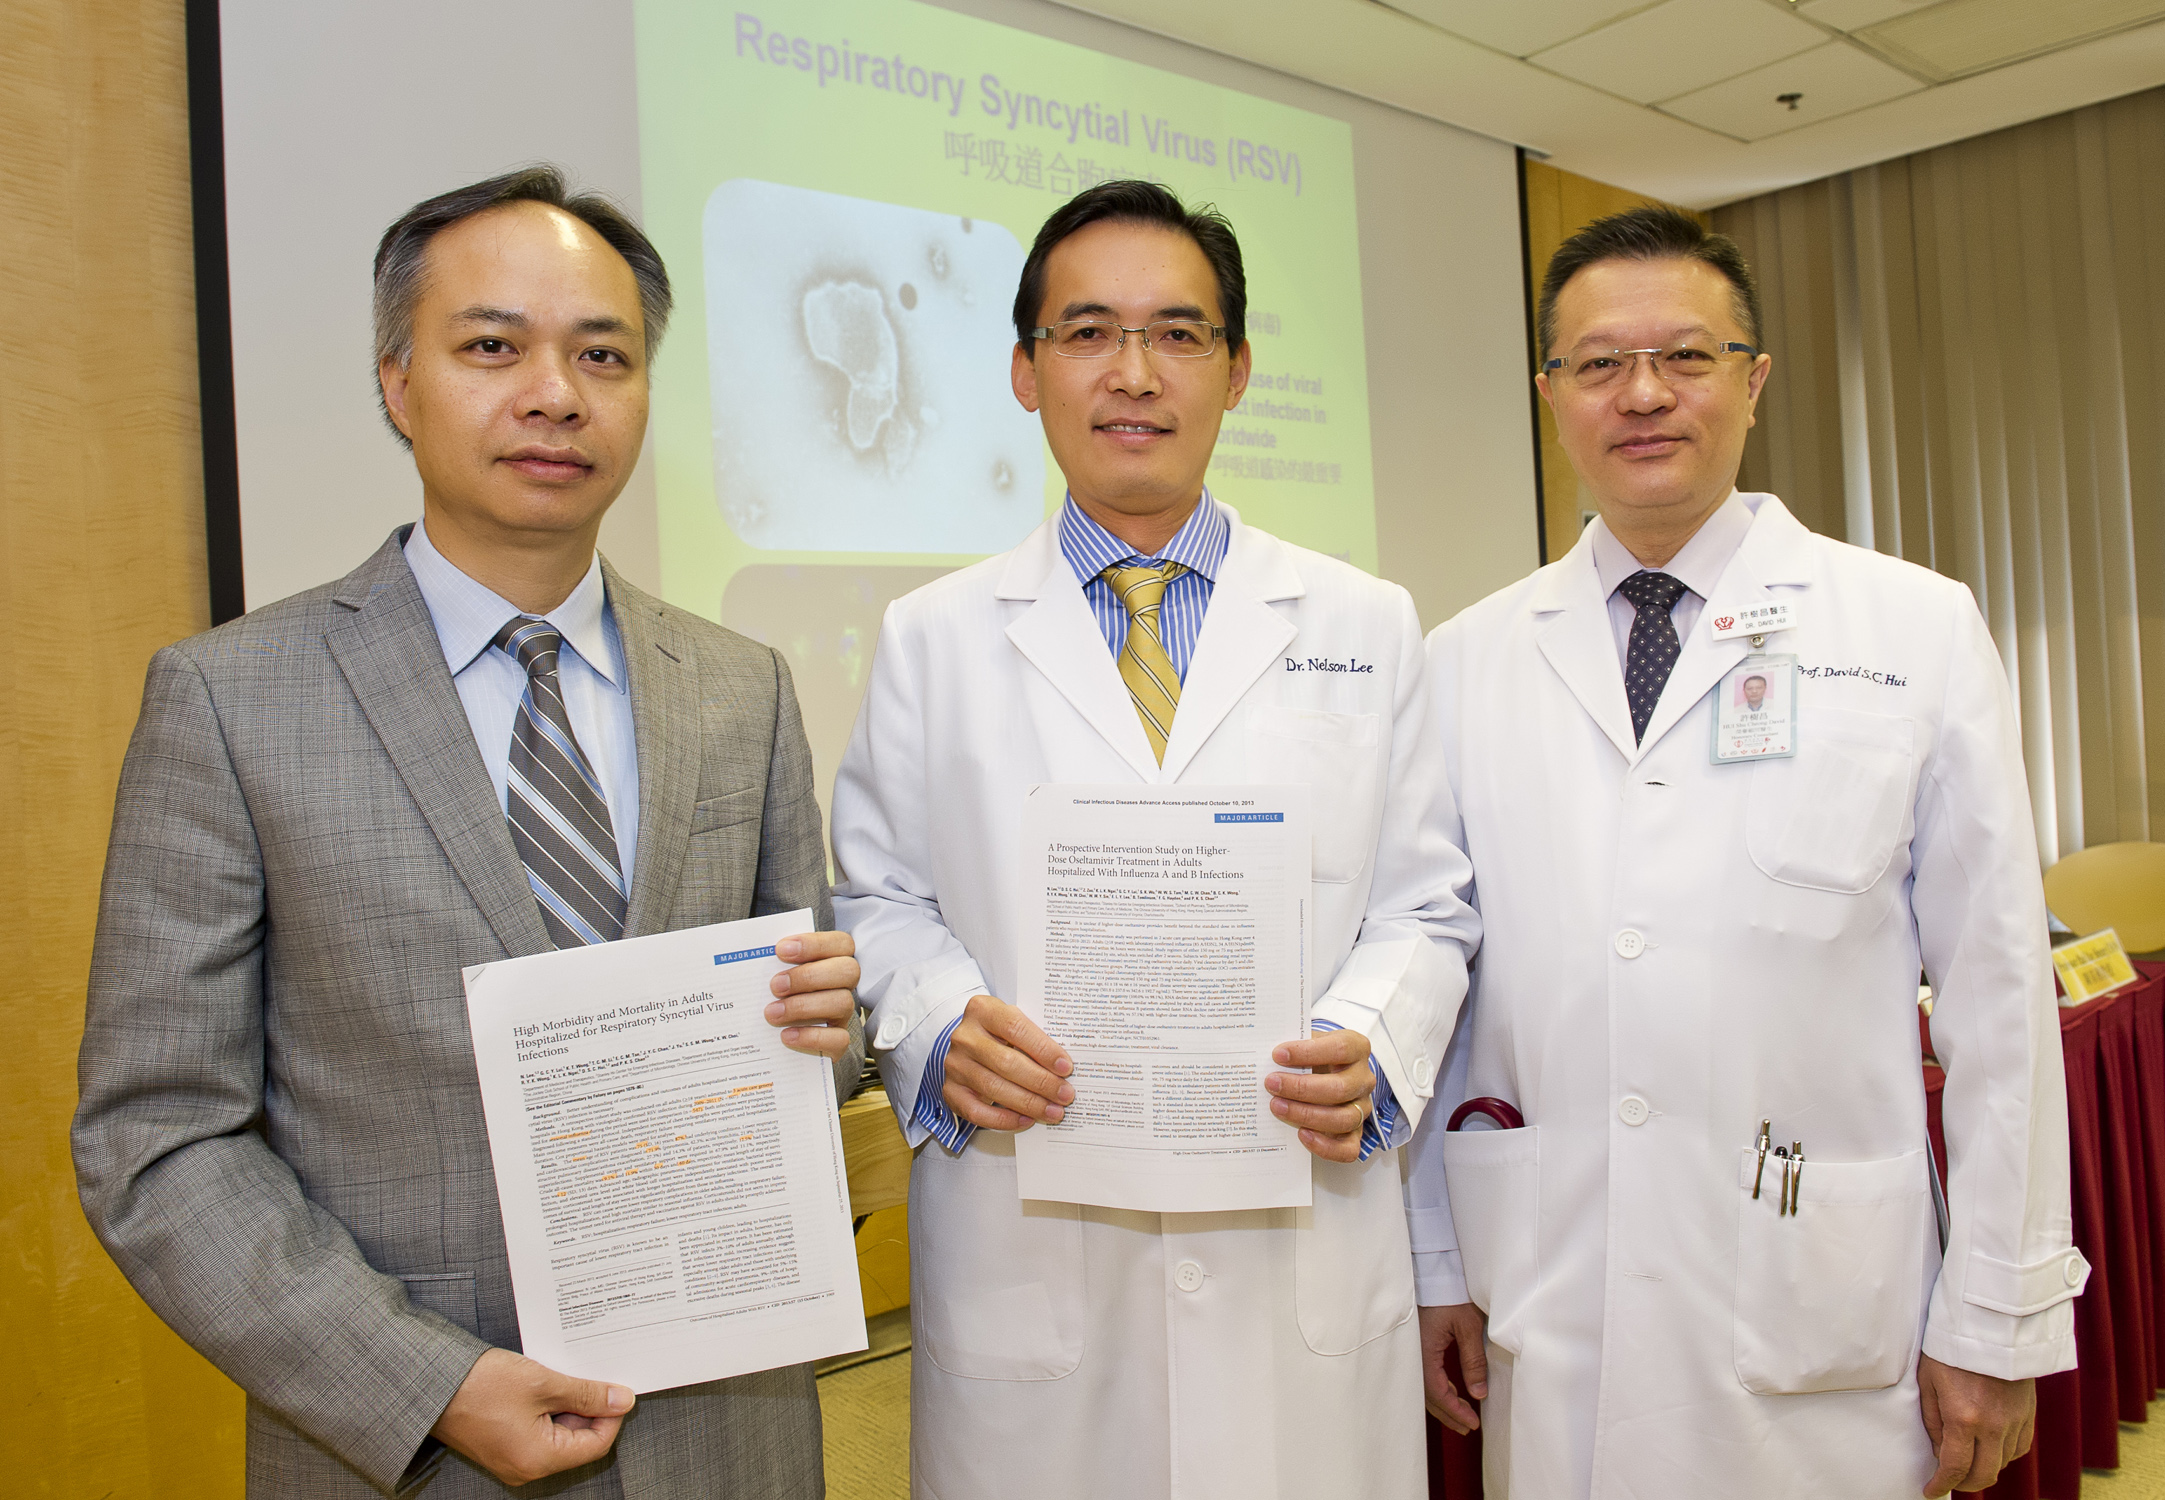 (From left) Professor Paul K.S. CHAN, Chairman, Department of Microbiology; Professor Nelson L.S. LEE, Head of Division of Infectious Diseases, Department of Medicine & Therapeutics and Professor David S.C. HUI, Stanley Ho Professor of Respiratory Medicine, Department of Medicine and Therapeutics at CUHK present their two recent research studies which reveal infections caused by RSV and influenza among Hong Kong adults and elderly could be life-threatening.